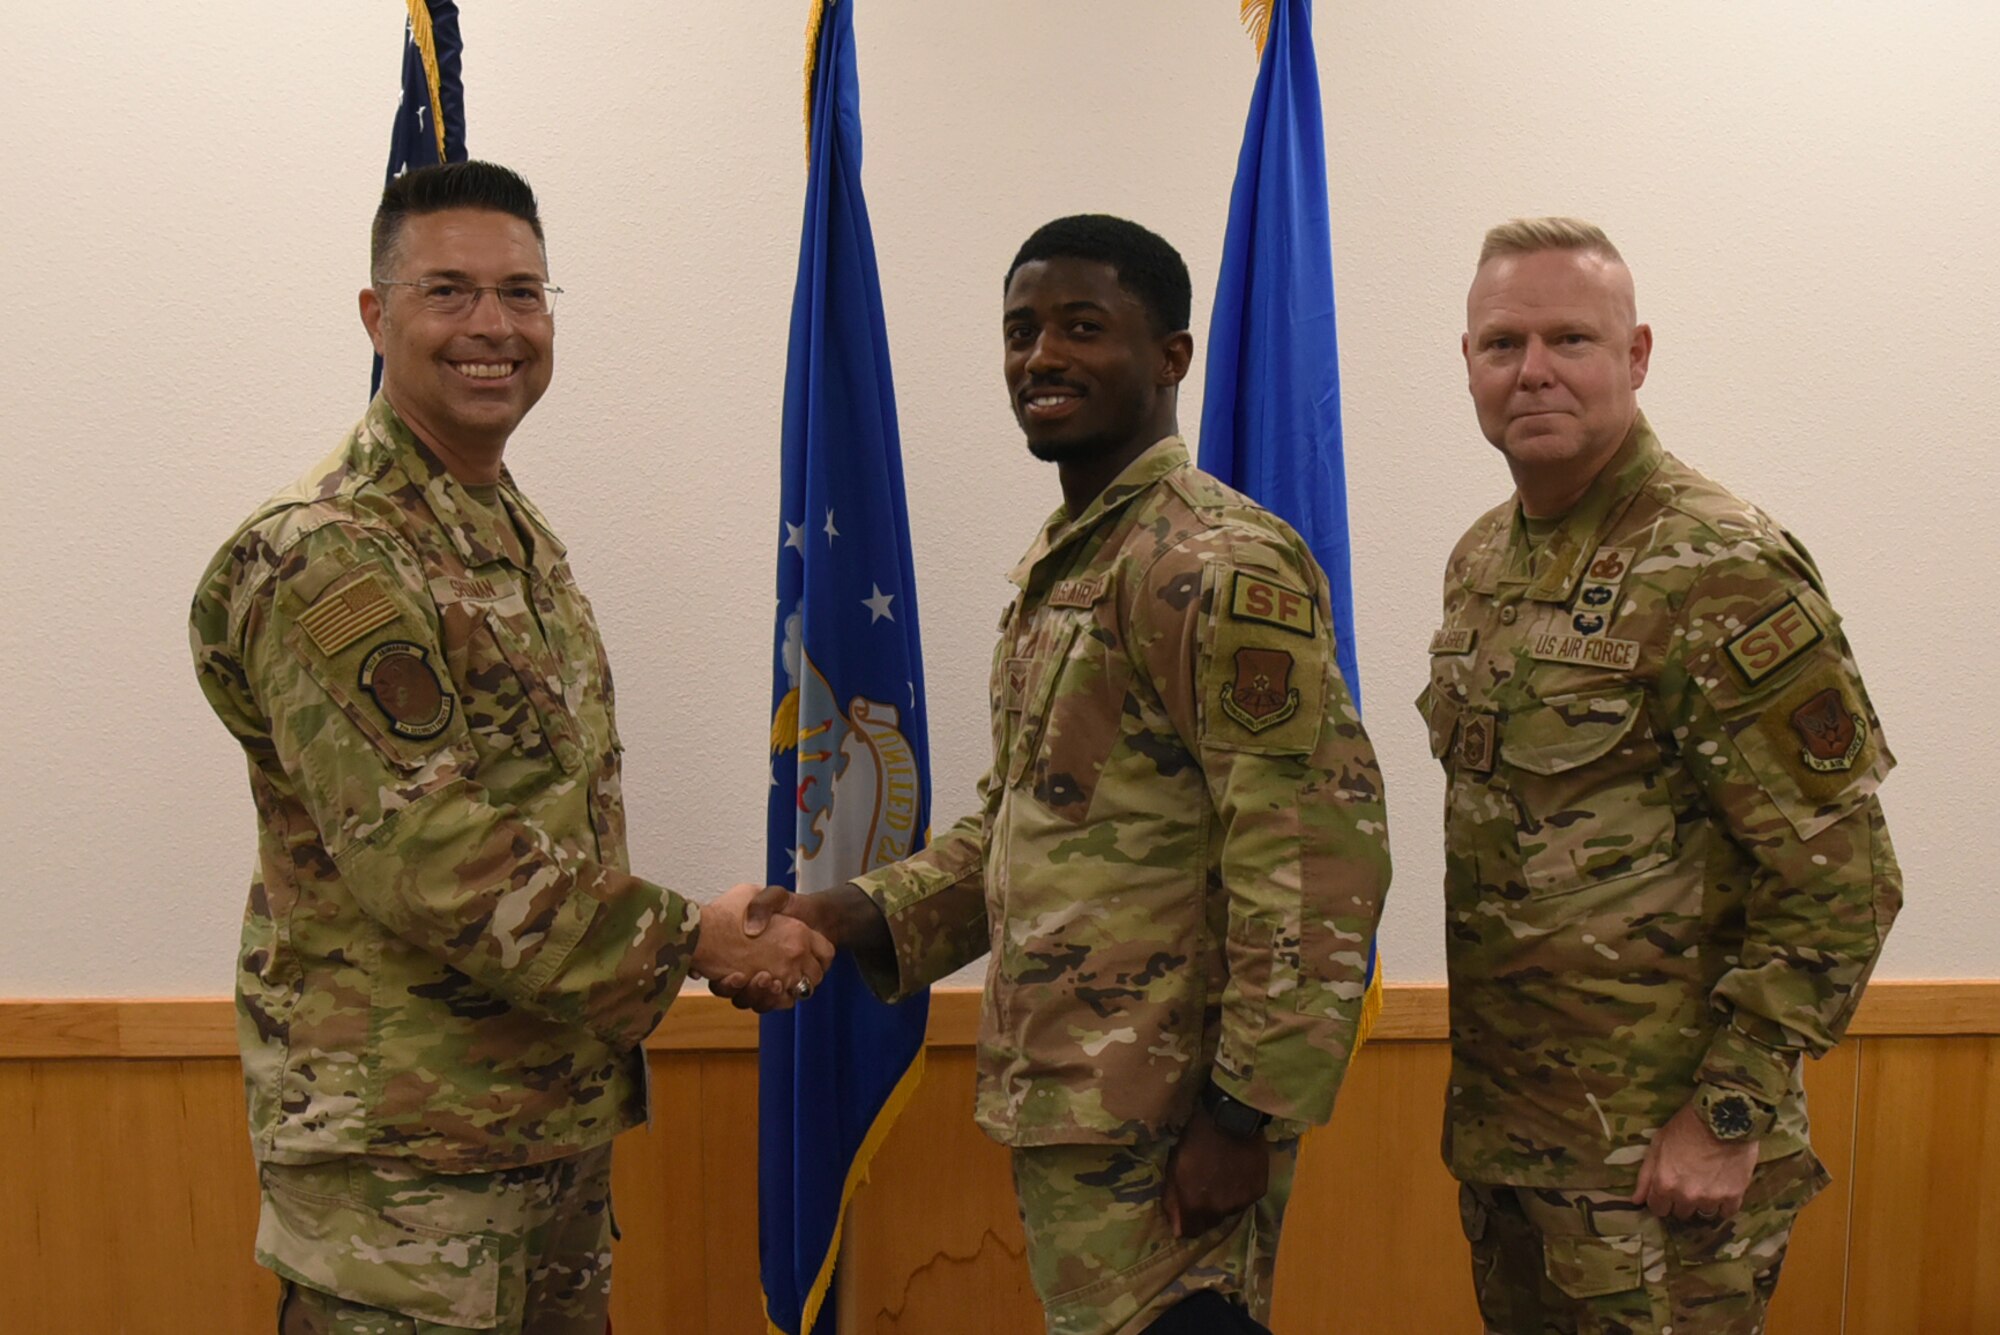 U.S. Air Force Brig. Gen. Thomas Sherman, Security Forces director, along with Chief Master Sgt. Donald Gallagher, Security Forces career field manager, presents a coin to Senior Airman Frederick Lawrence, 7th Security Forces Squadron physical security section lead, at Dyess Air Force Base, Texas, June 15, 2023. Sherman visited Dyess to present the 7th SFS with the Air Force Best Medium Sized Security Forces Squadron Award along with seeing new innovations including the robotic dog, a new GPS system, upgraded flack vests and more. (U.S. Air Force photo by Senior Airman Sophia Robello)